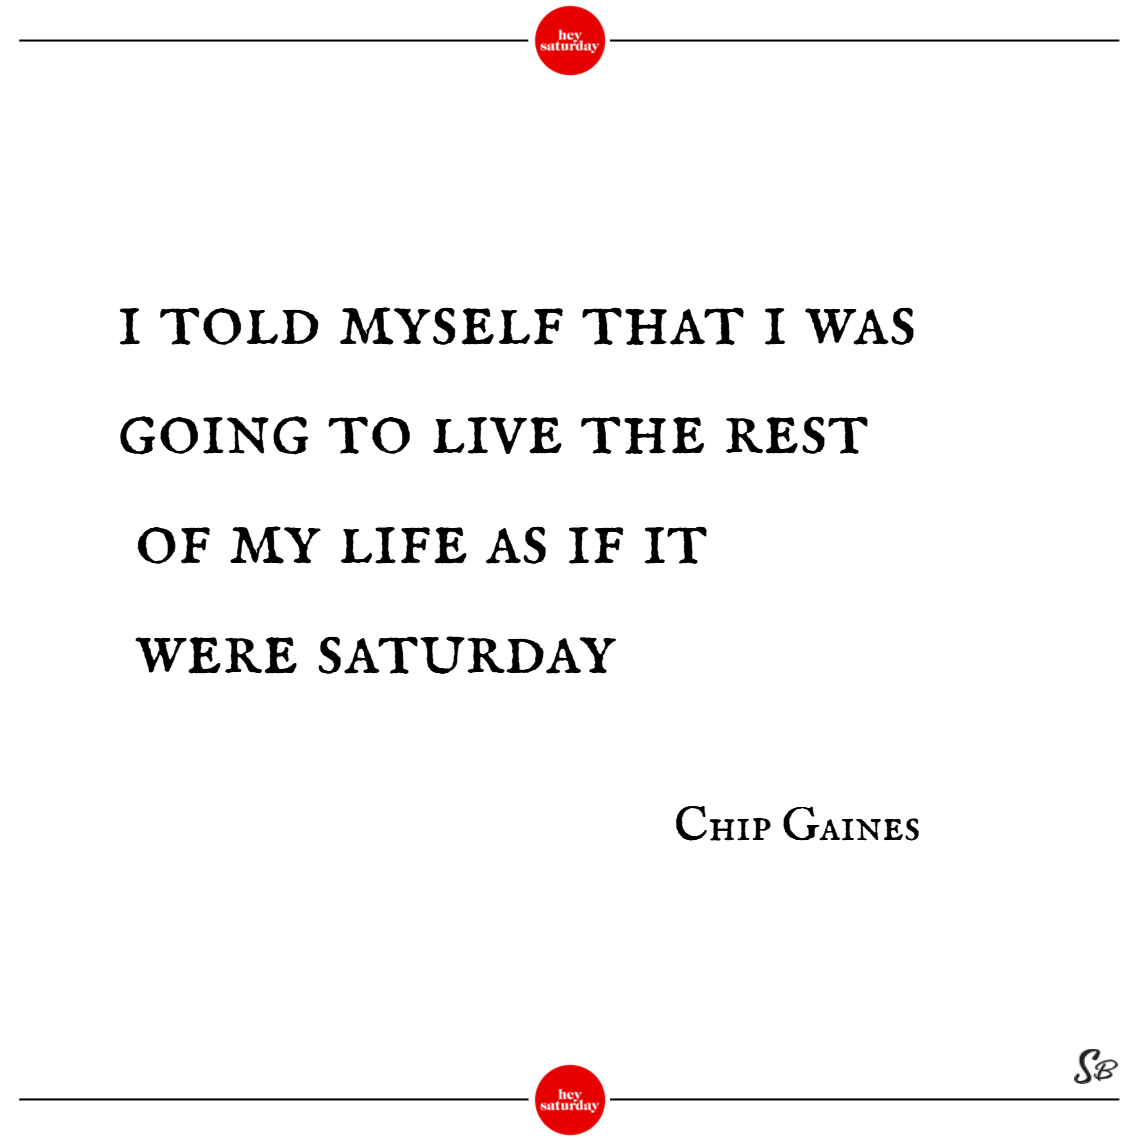 I told myself that i was going to live the rest of my life as if it were saturday. - chip gaines